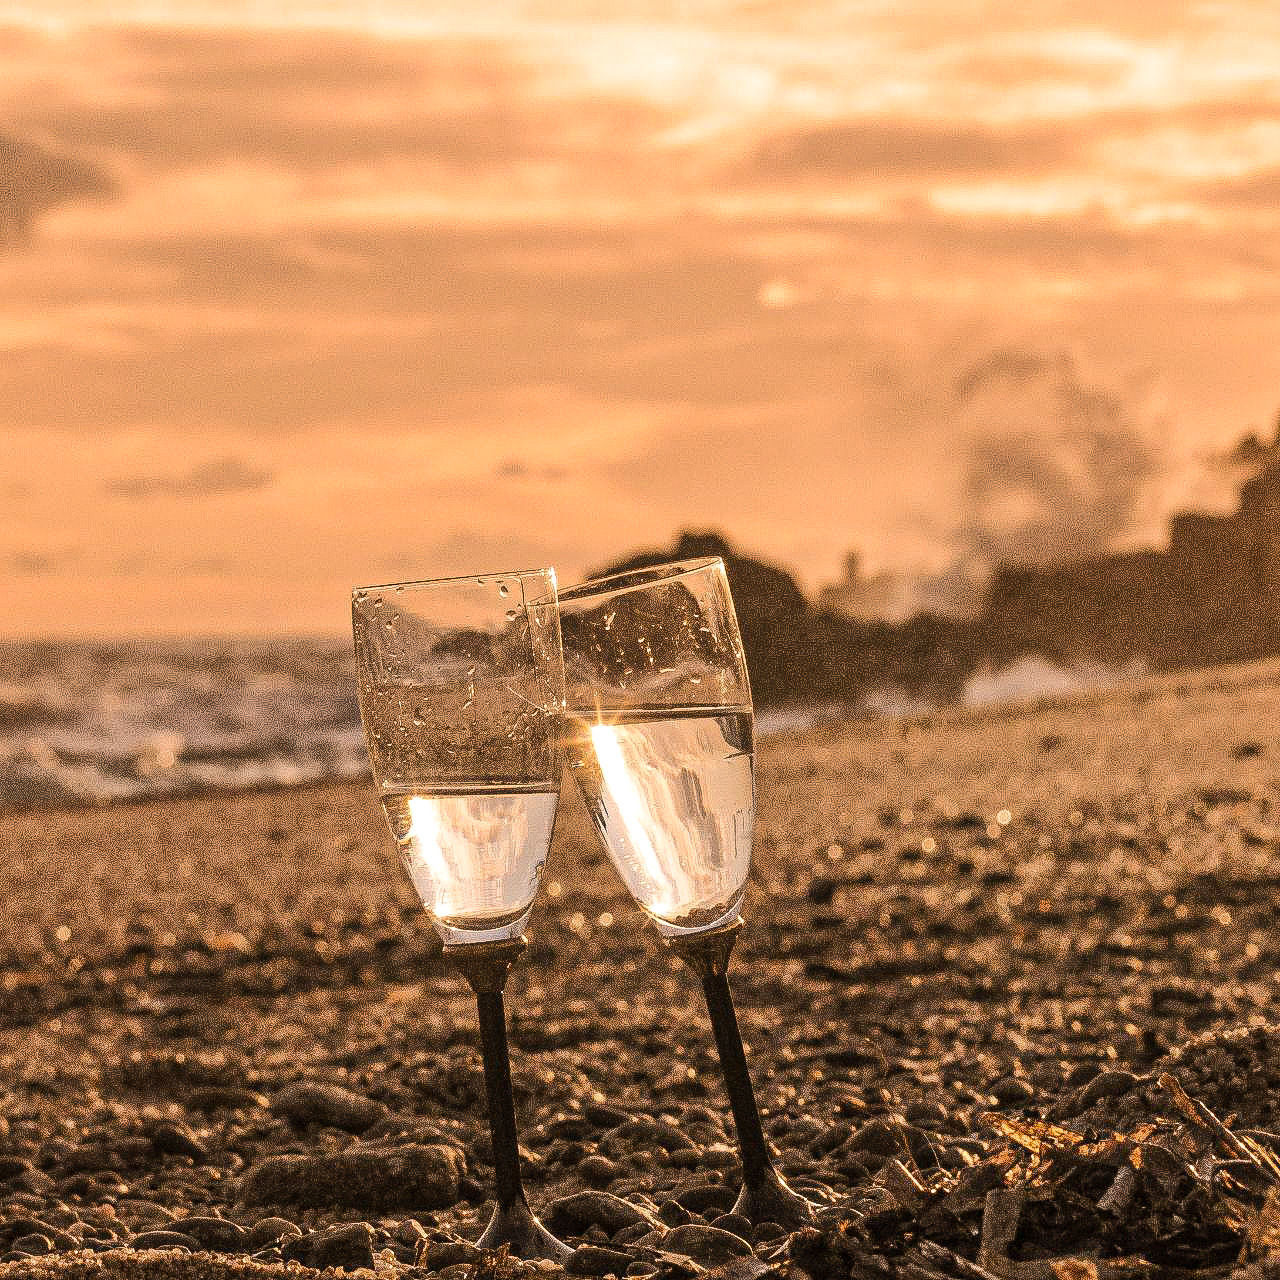 CLOSE-UP OF BEER GLASS AGAINST SUNSET